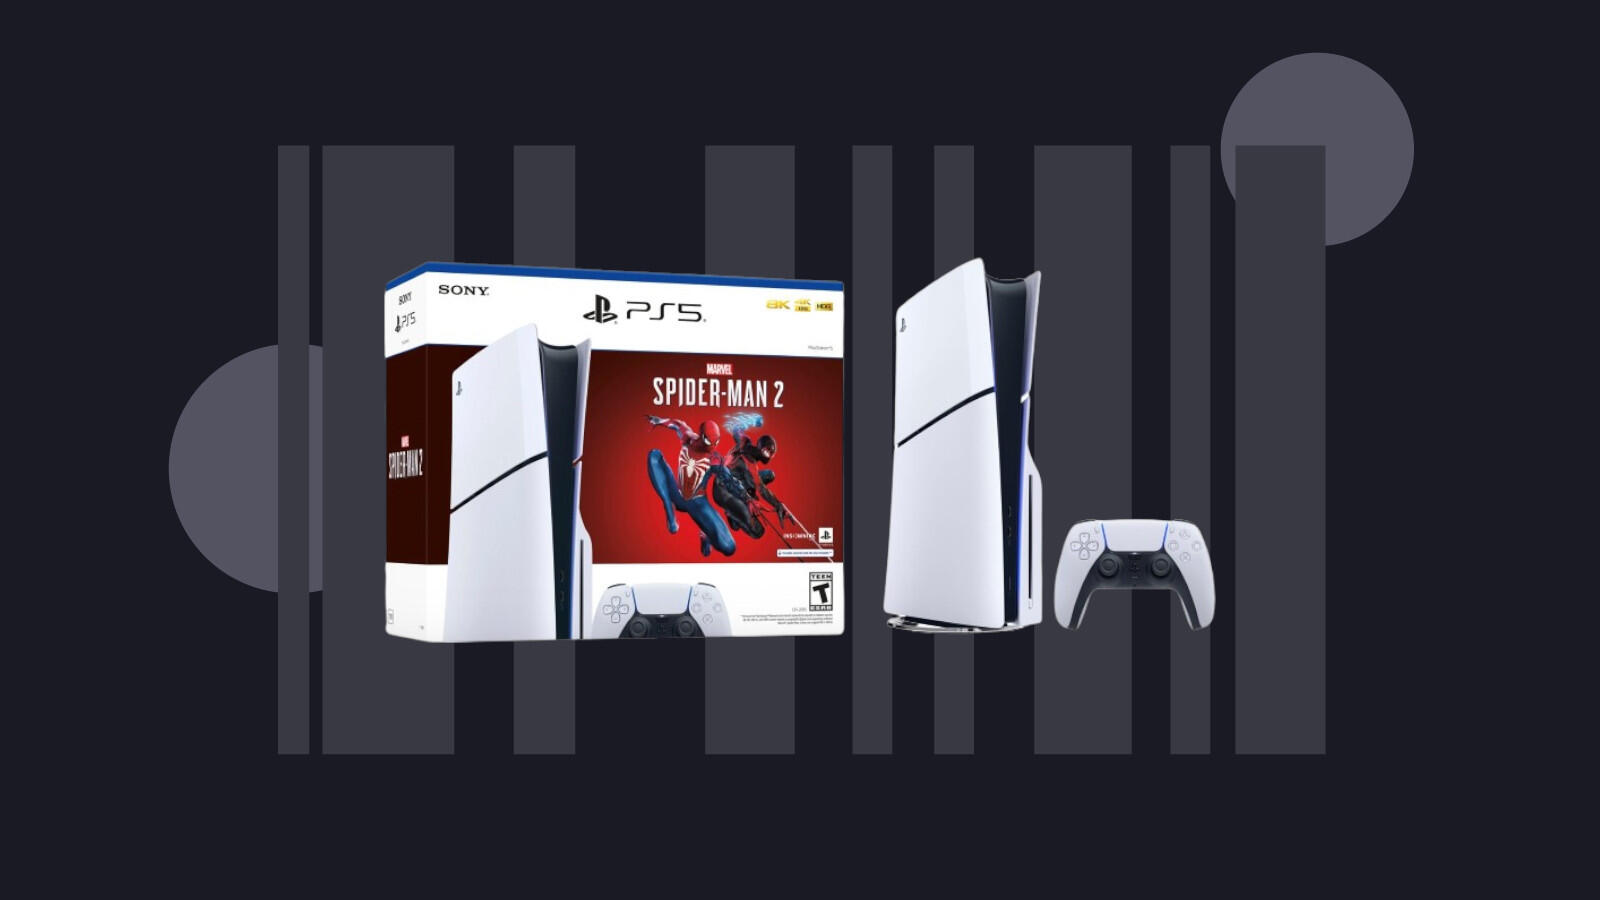 The best PS5 bundles and deals in December 2023